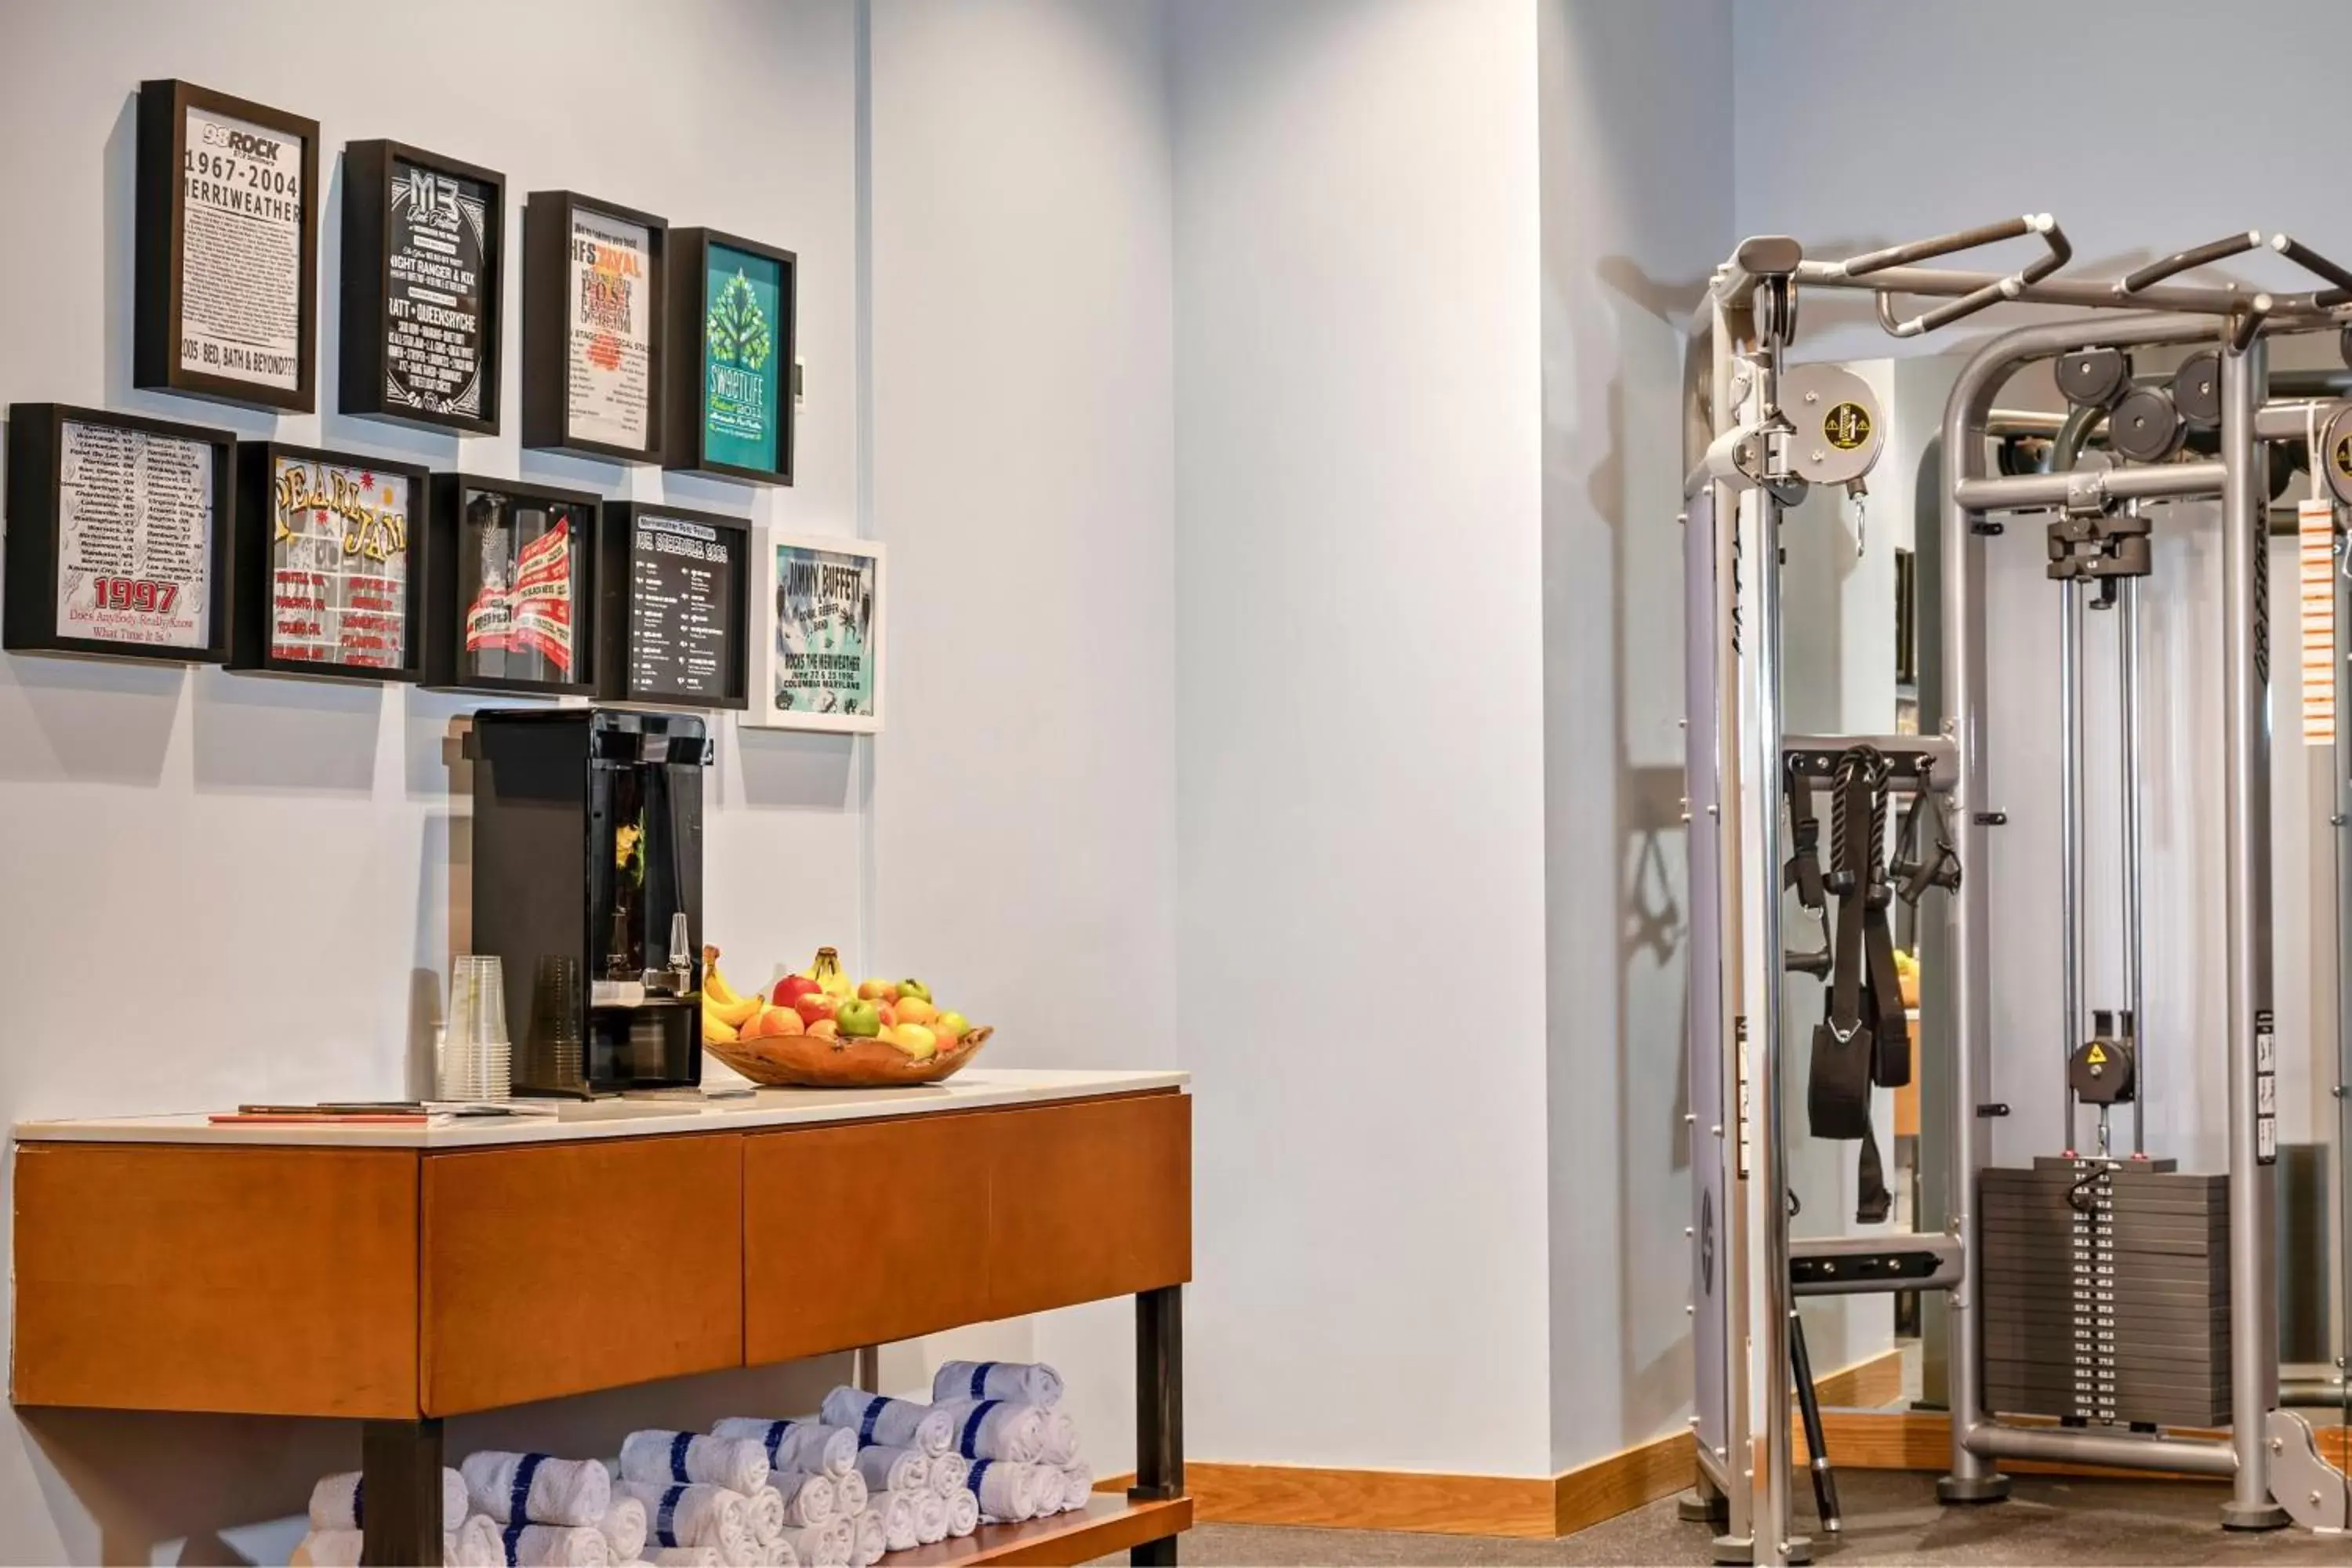 Fitness centre/facilities in Merriweather Lakehouse Hotel, Autograph Collection